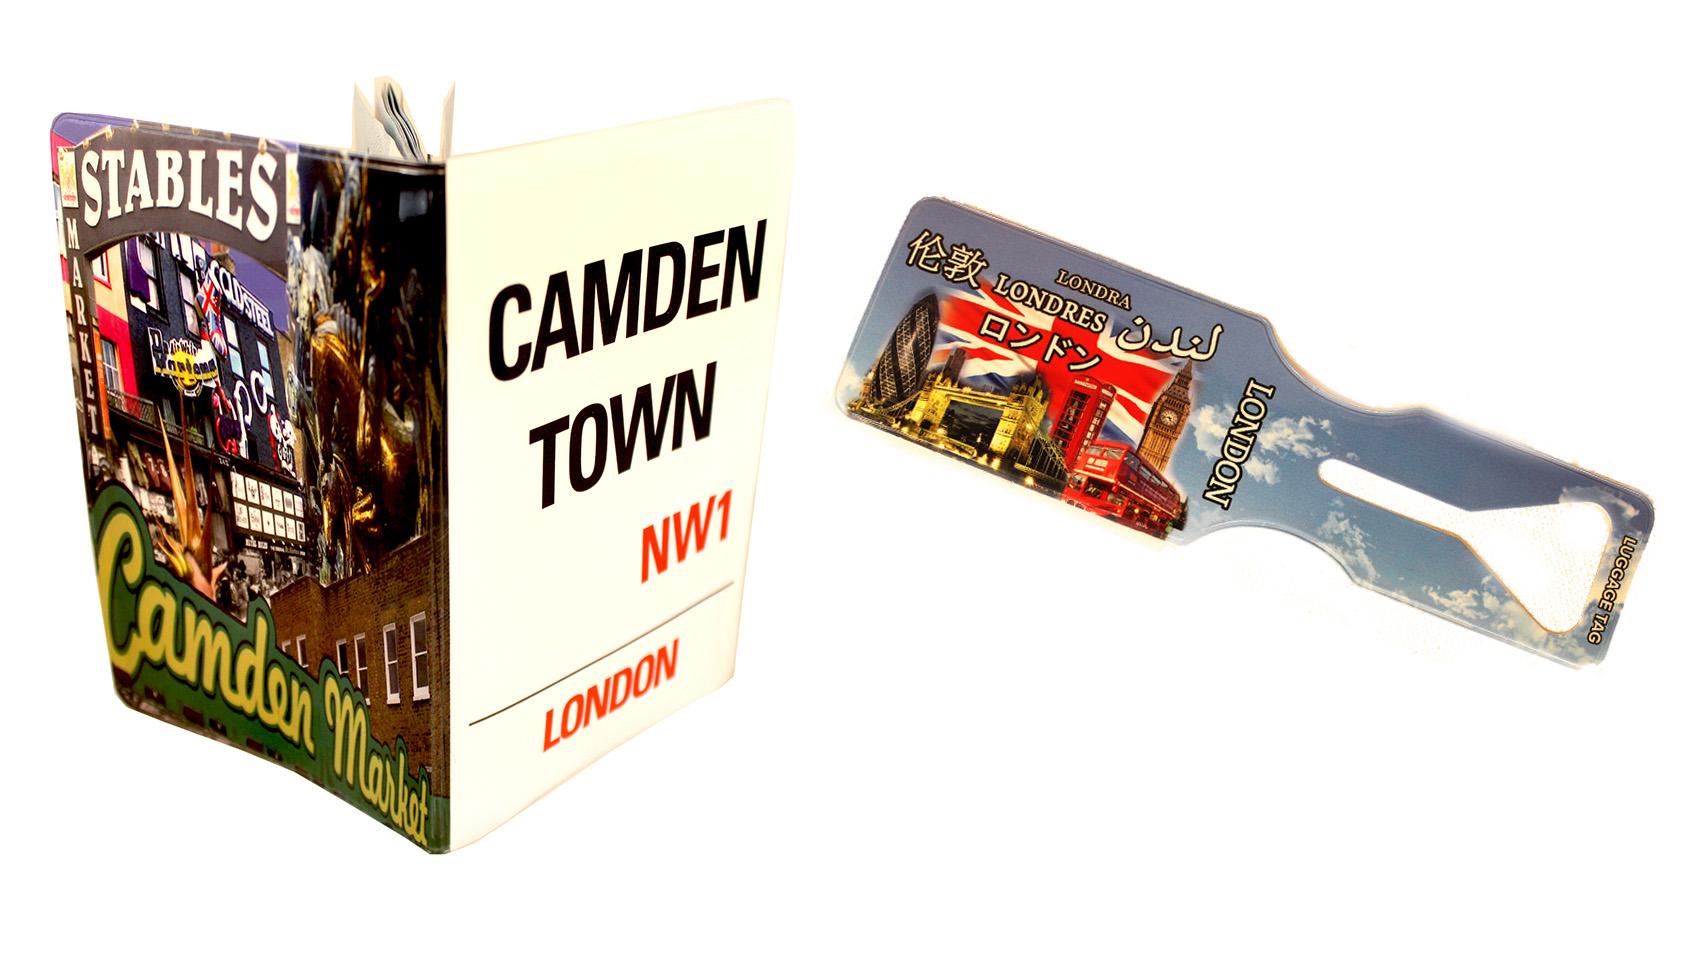 Camden Town and London Montage Passport Cover and Luggage Tag Set